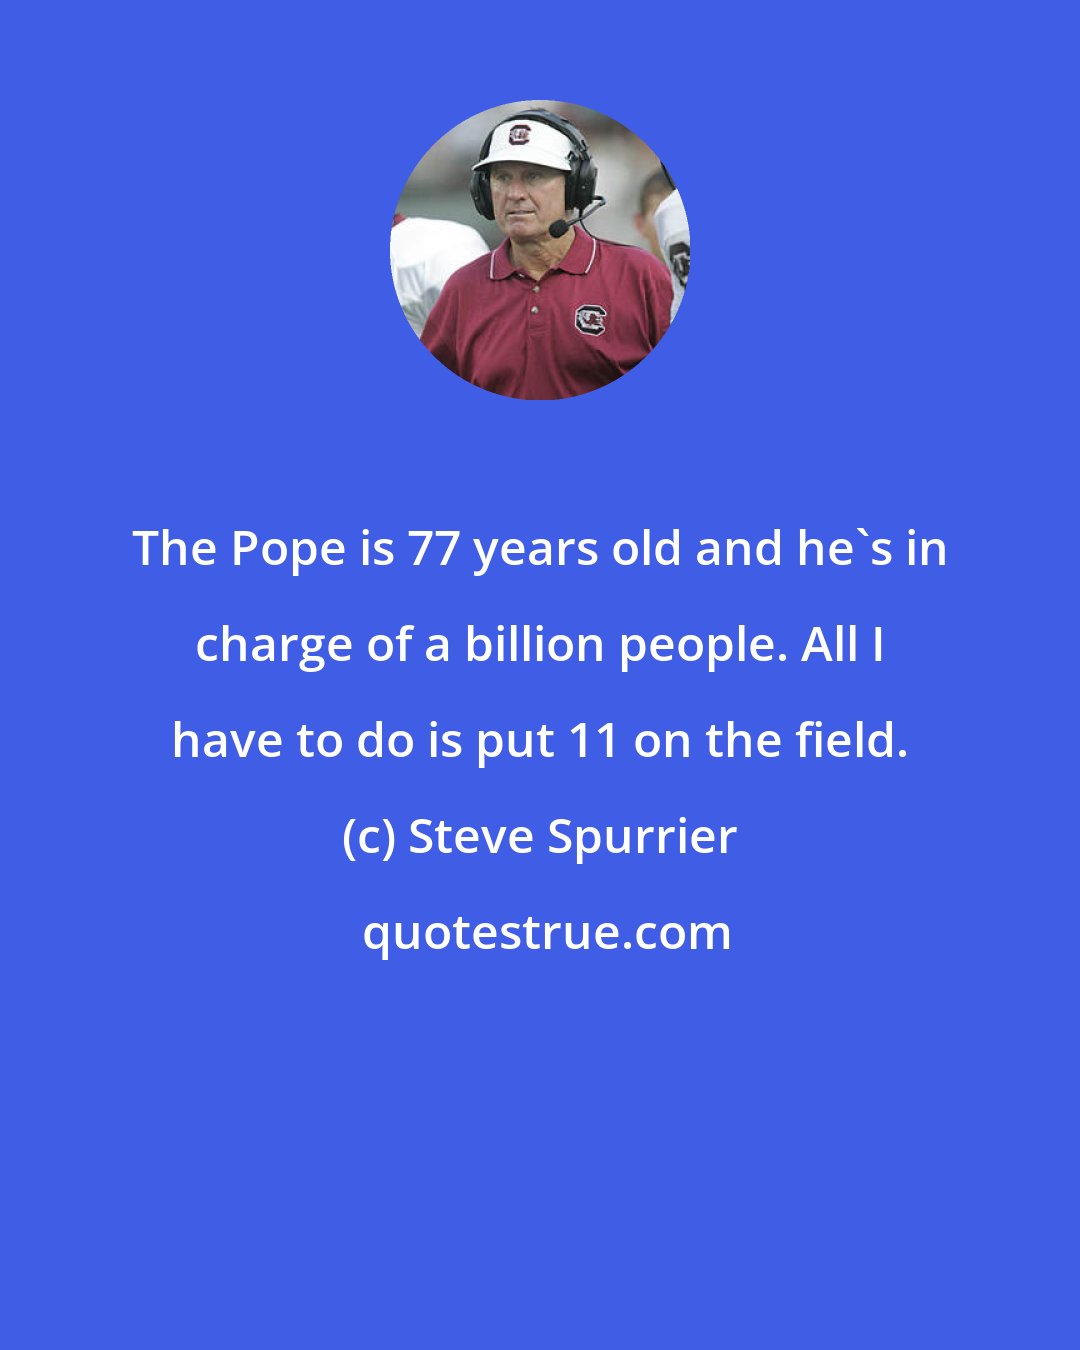 Steve Spurrier: The Pope is 77 years old and he's in charge of a billion people. All I have to do is put 11 on the field.